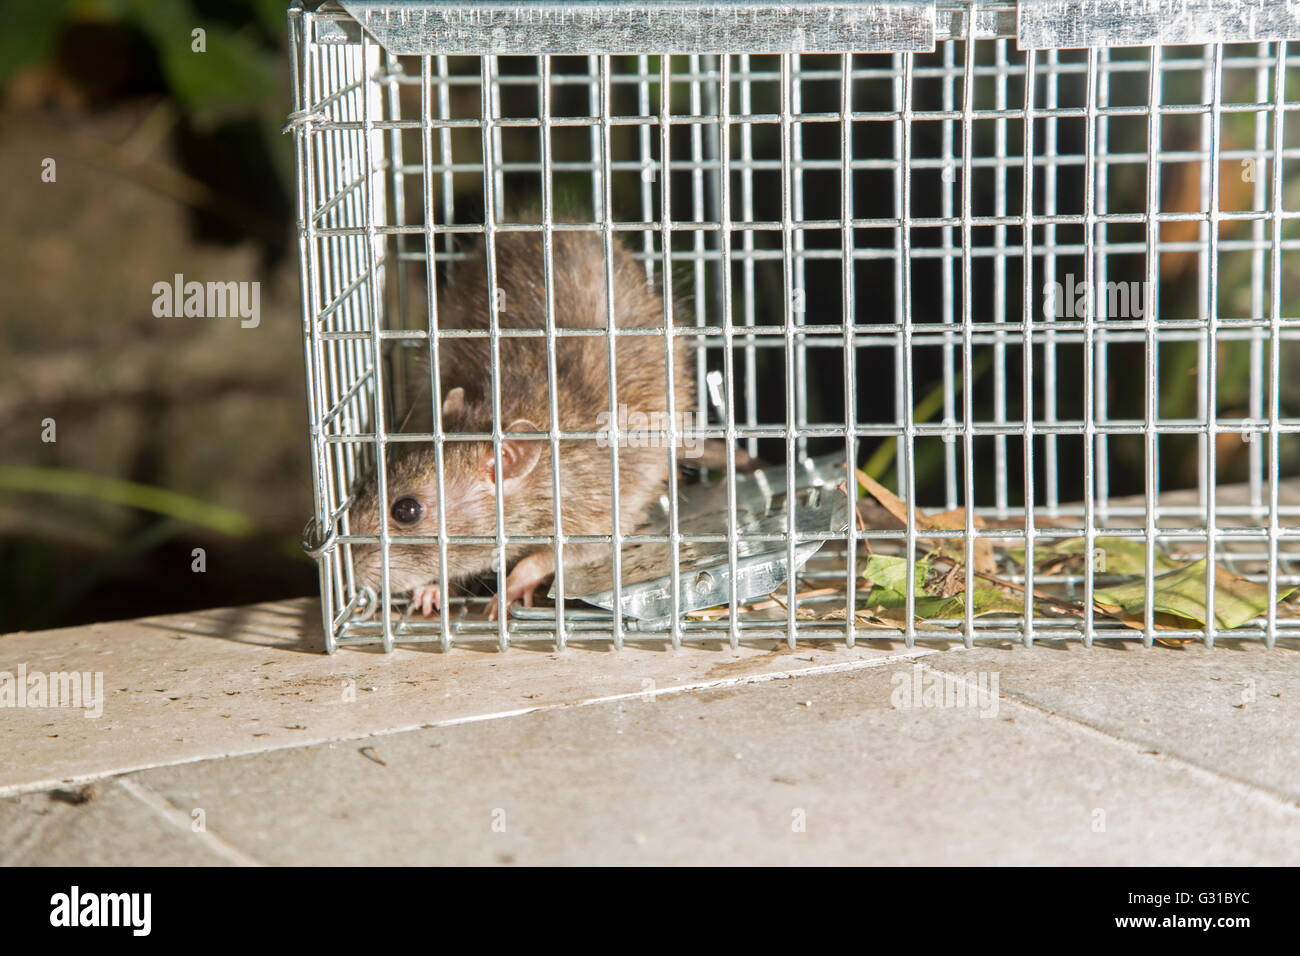 https://c8.alamy.com/comp/G31BYC/close-up-of-a-gray-rat-trapped-in-a-steel-cage-G31BYC.jpg